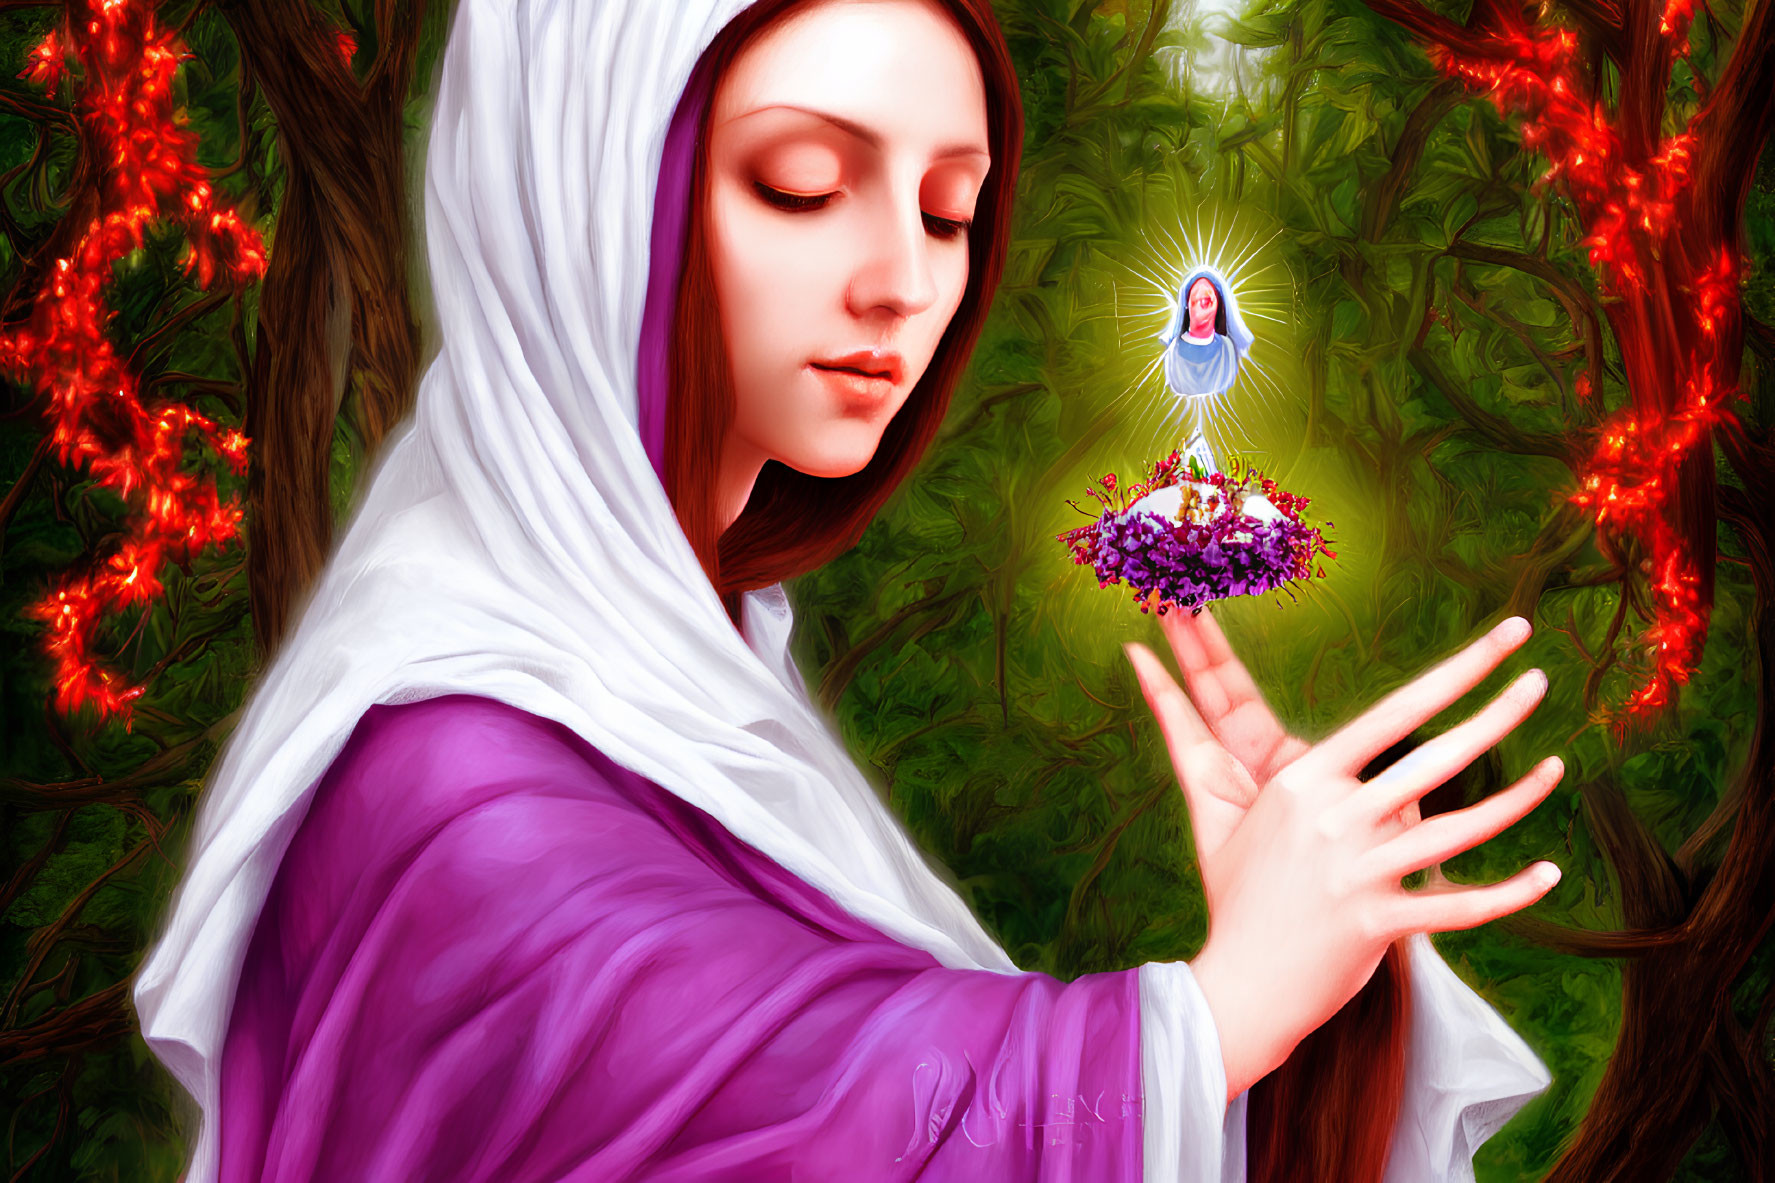 Purple-robed woman gazes at radiant figure in lush garden